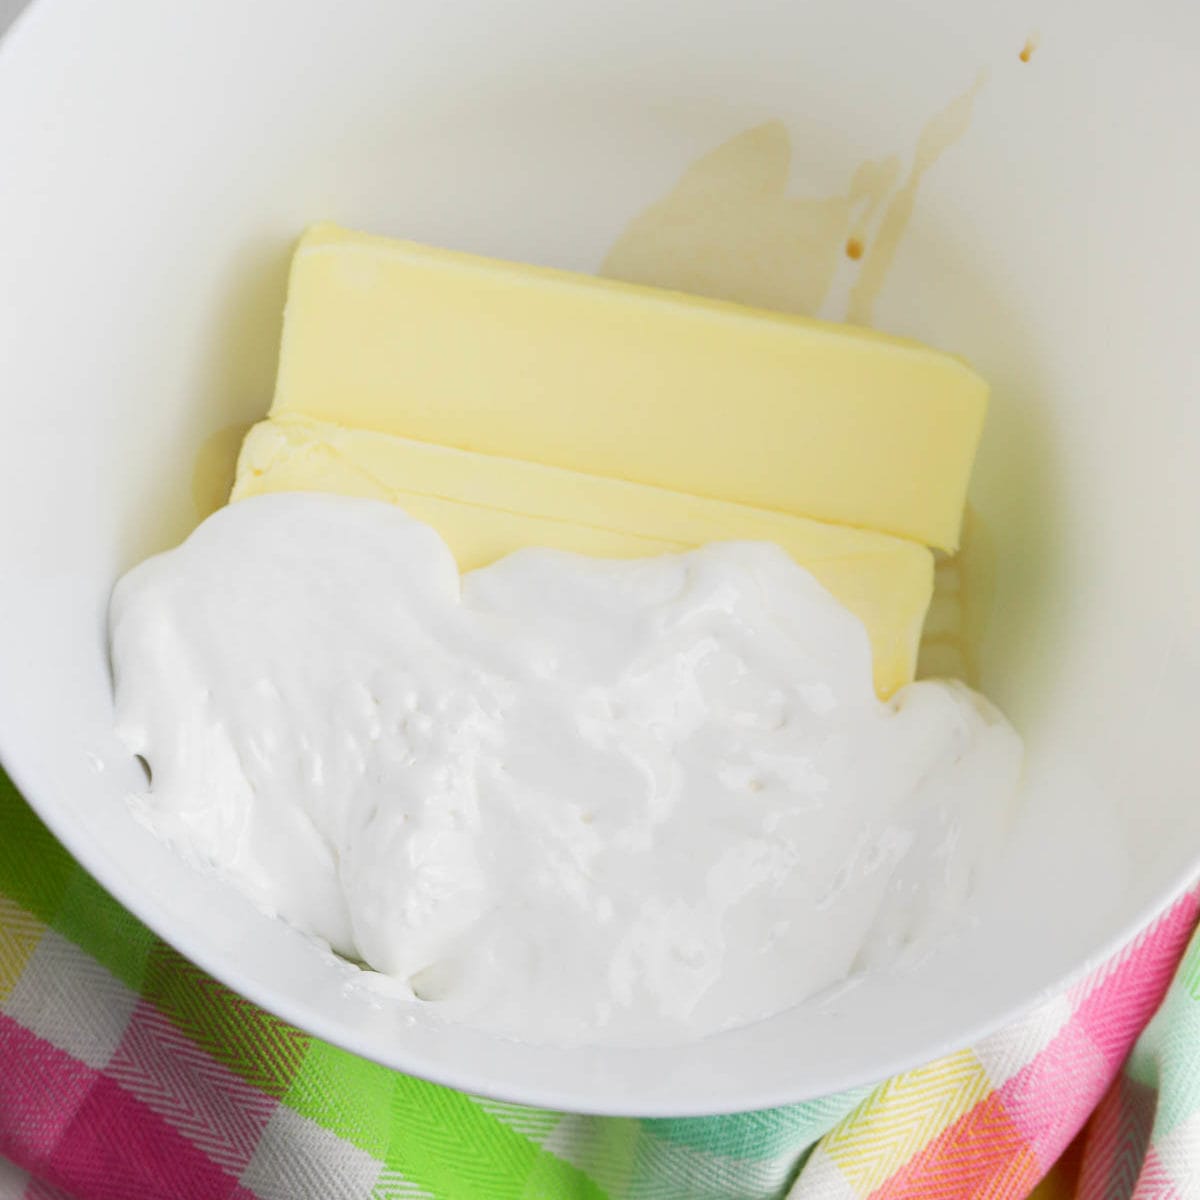 mixing the butter and marshmallow fluff